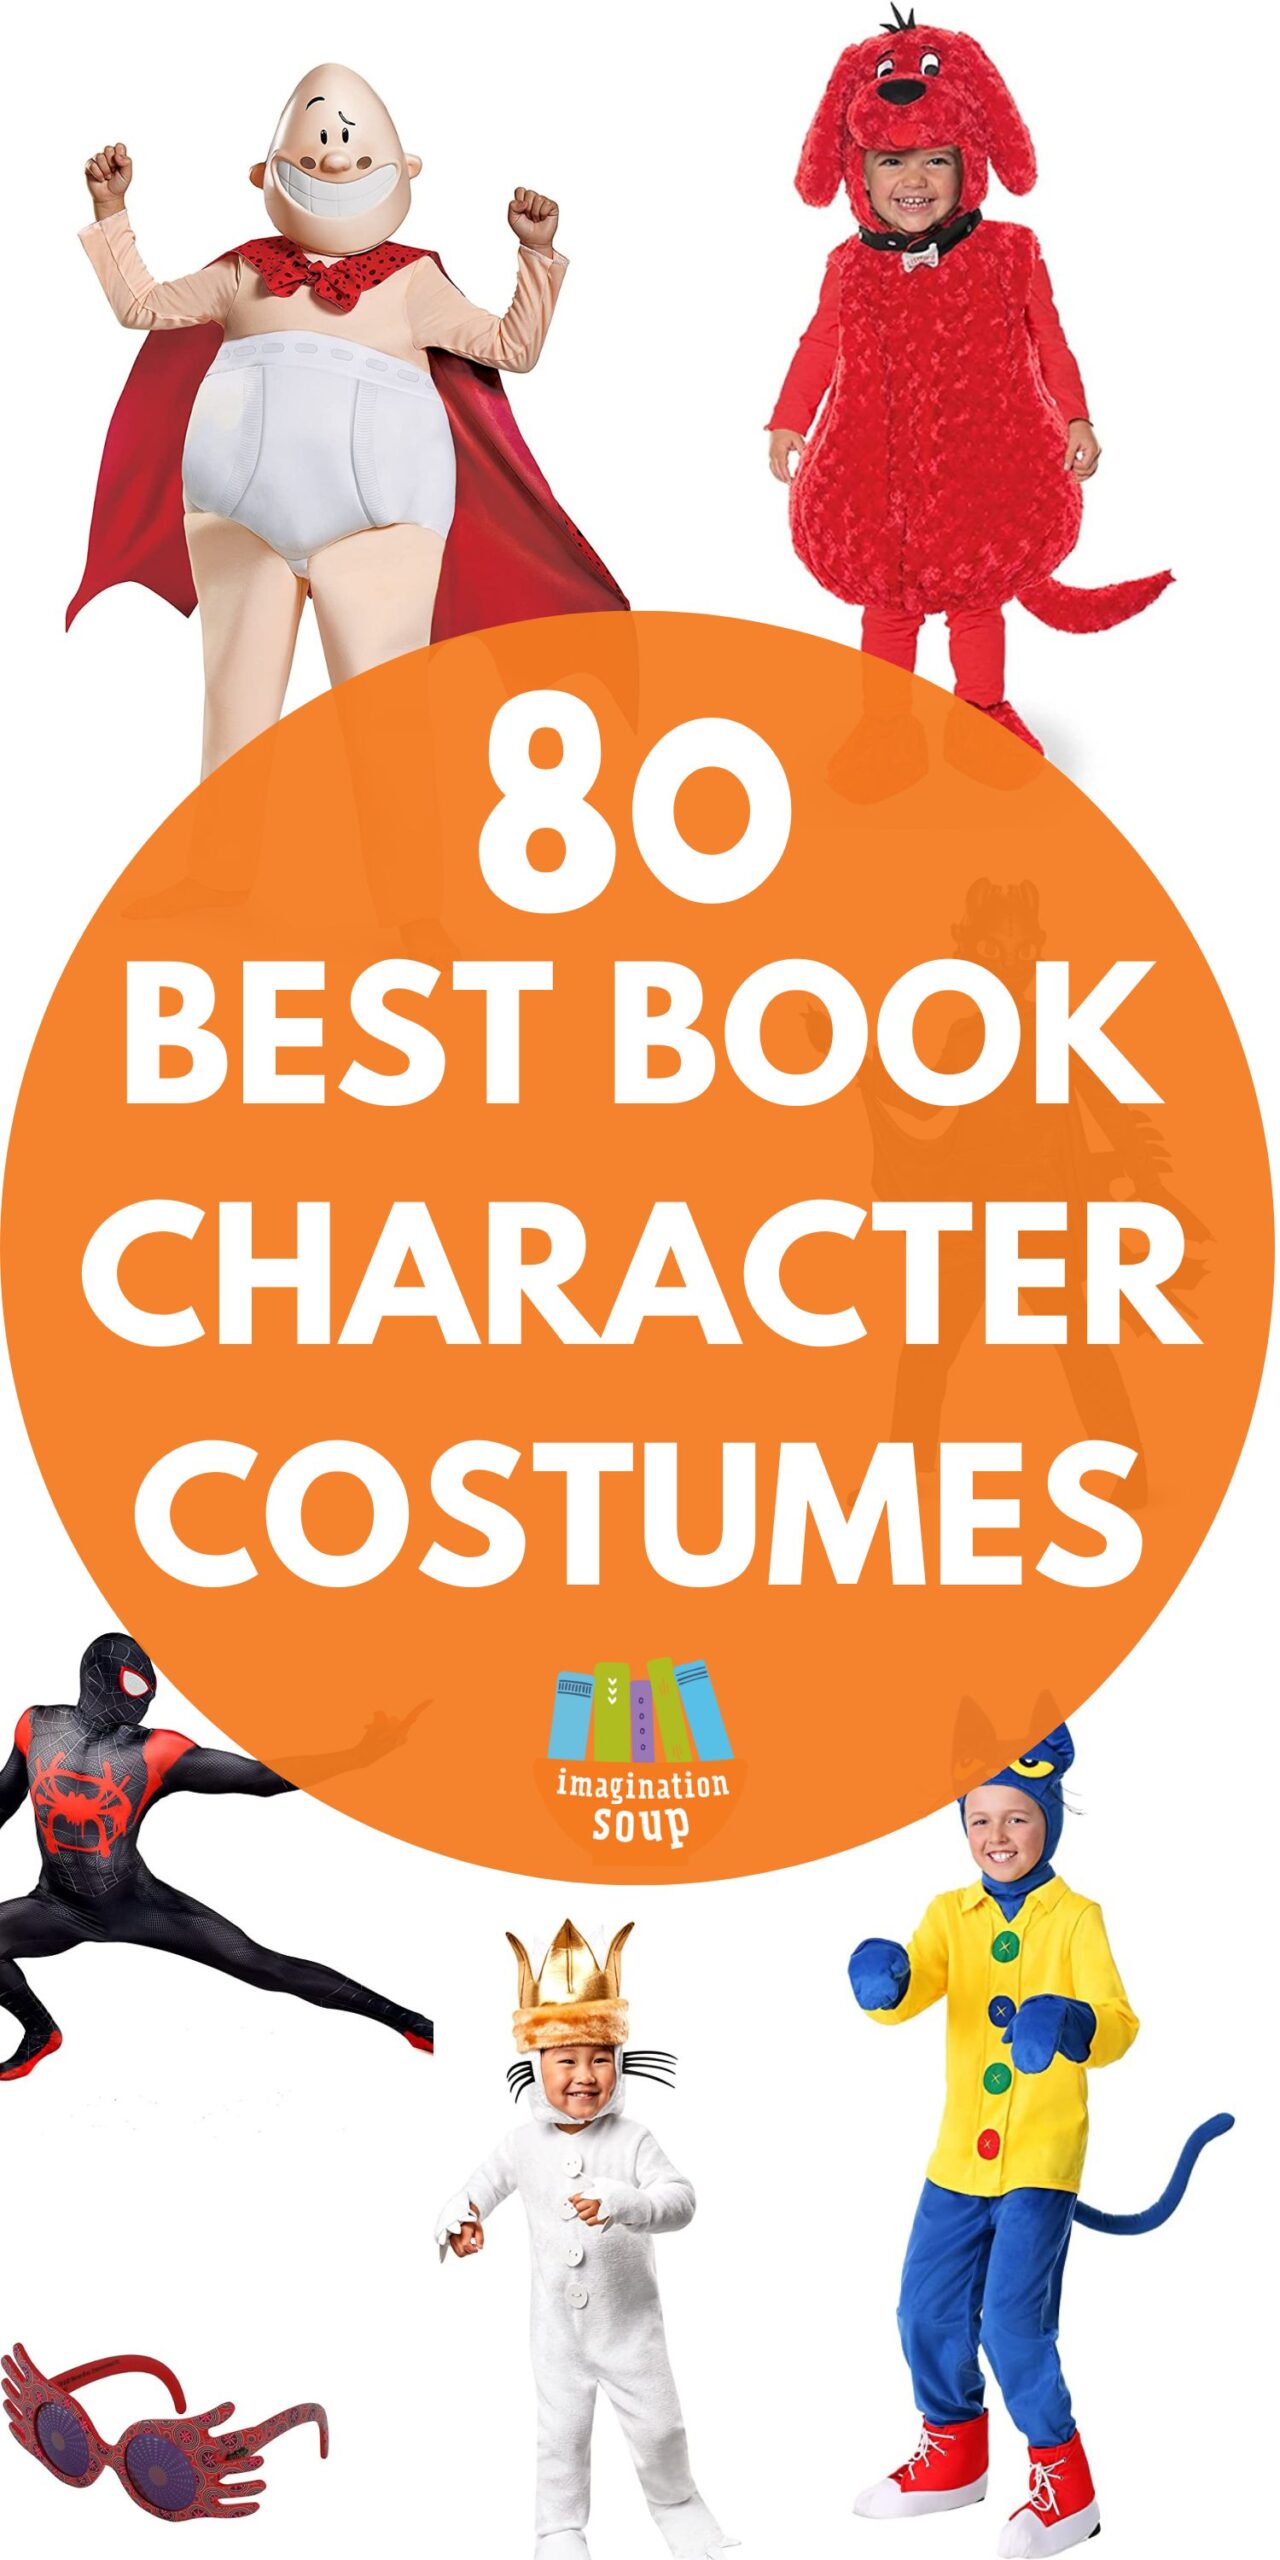 Dress up as your favorite book character for Halloween and have a Happy Bookish Halloween (or World Book Day)! How about one of these book character costume ideas from the favorite children's picture and chapter books?

Bring a favorite book character to life with easy book character costumes that you buy -- or make. I even have book character costume ideas for adults and for teachers!